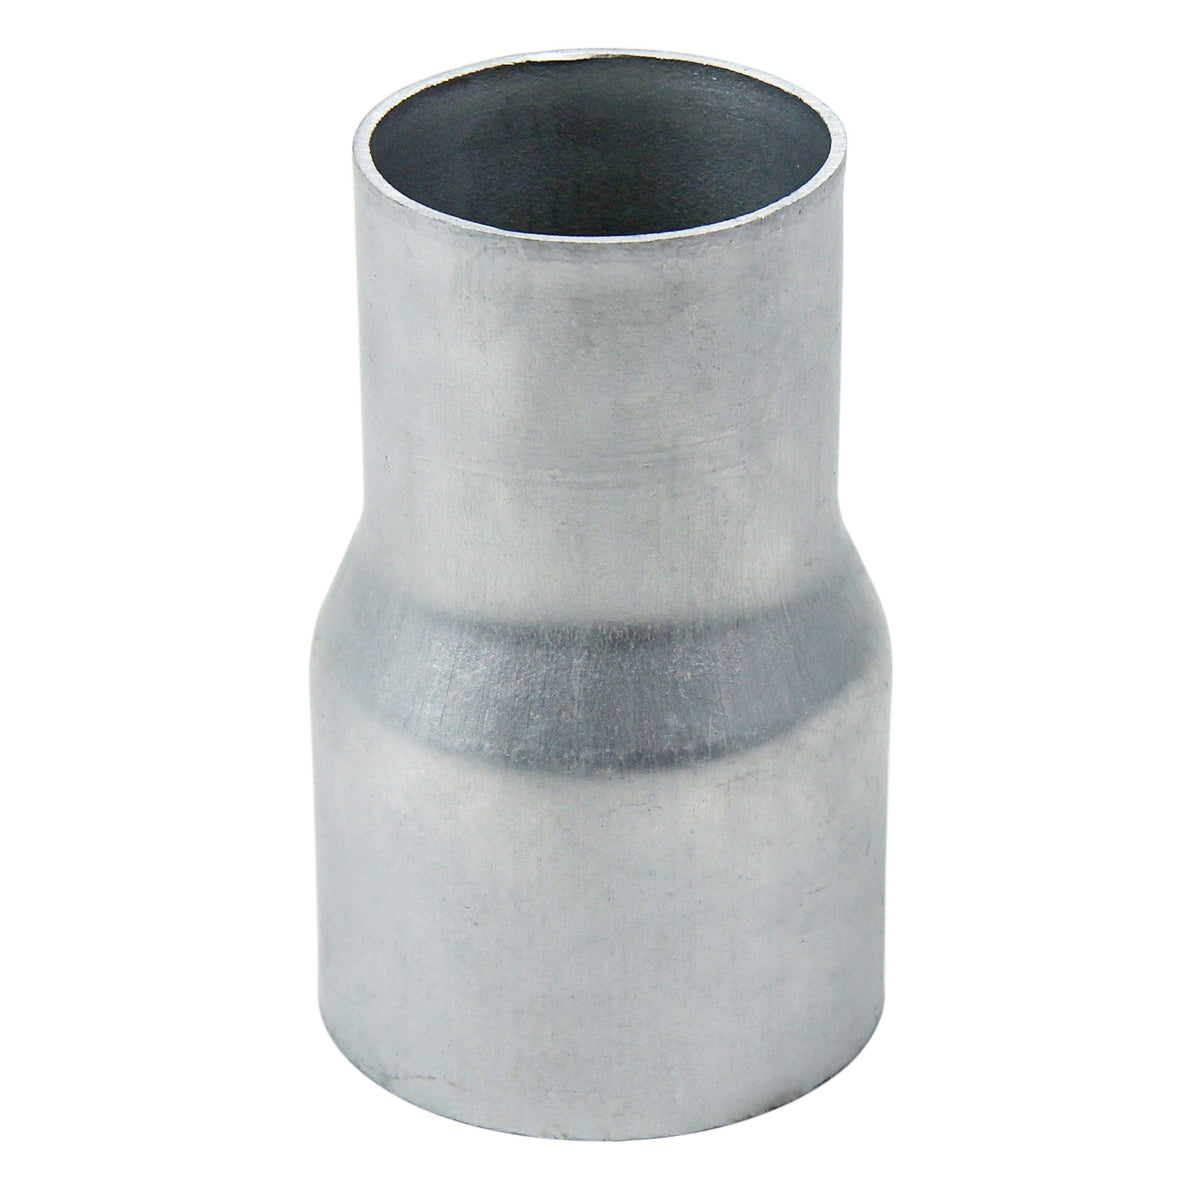 HPS 2.5 inch OD to 2.5 inch ID, 6061 Aluminum Slip Fit Transition Reducer Tube Joiner, 4 inch Long